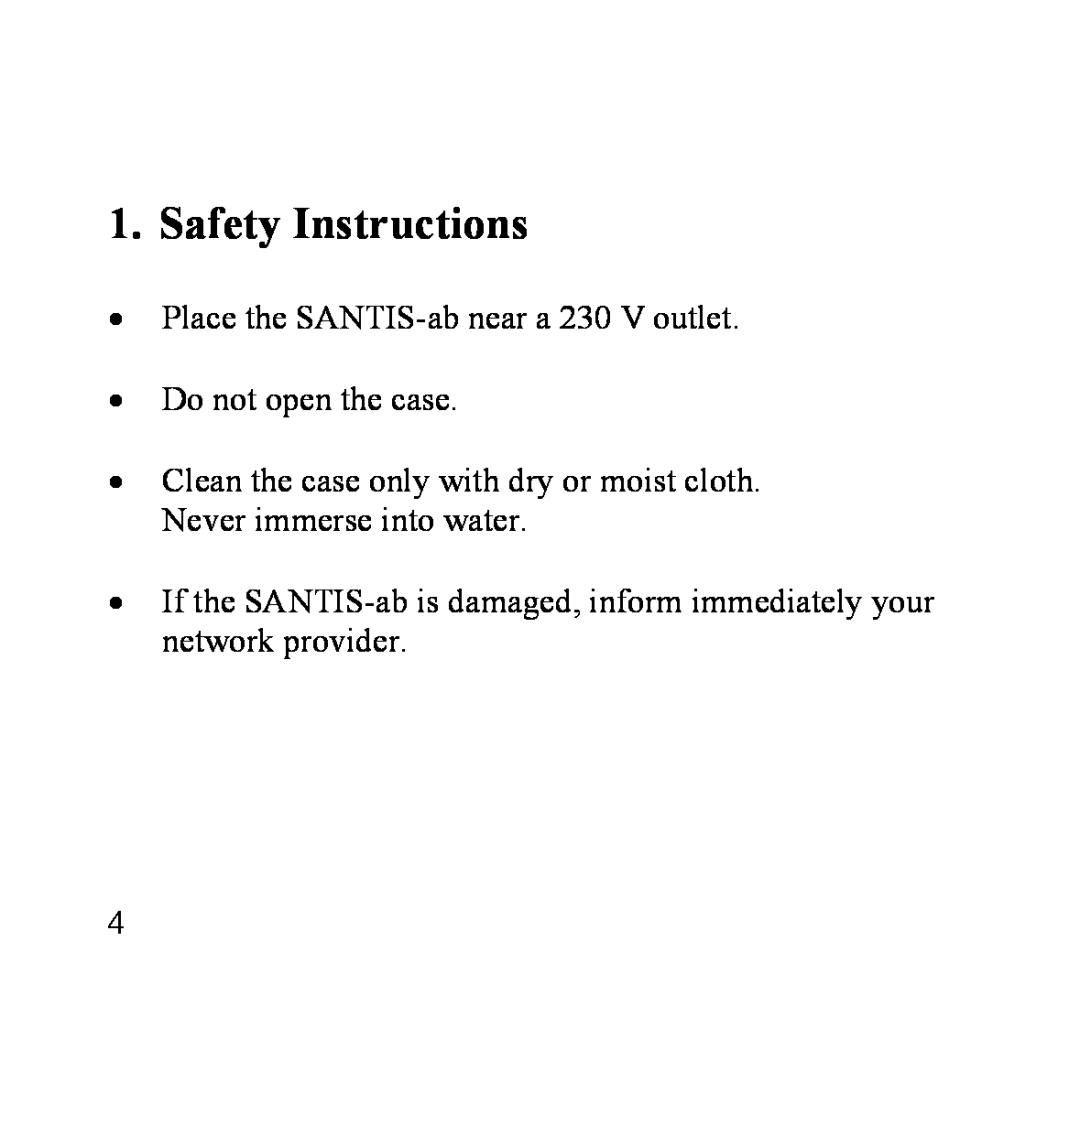 Siemens user manual Safety Instructions, Place the SANTIS-ab near a 230 V outlet Do not open the case 